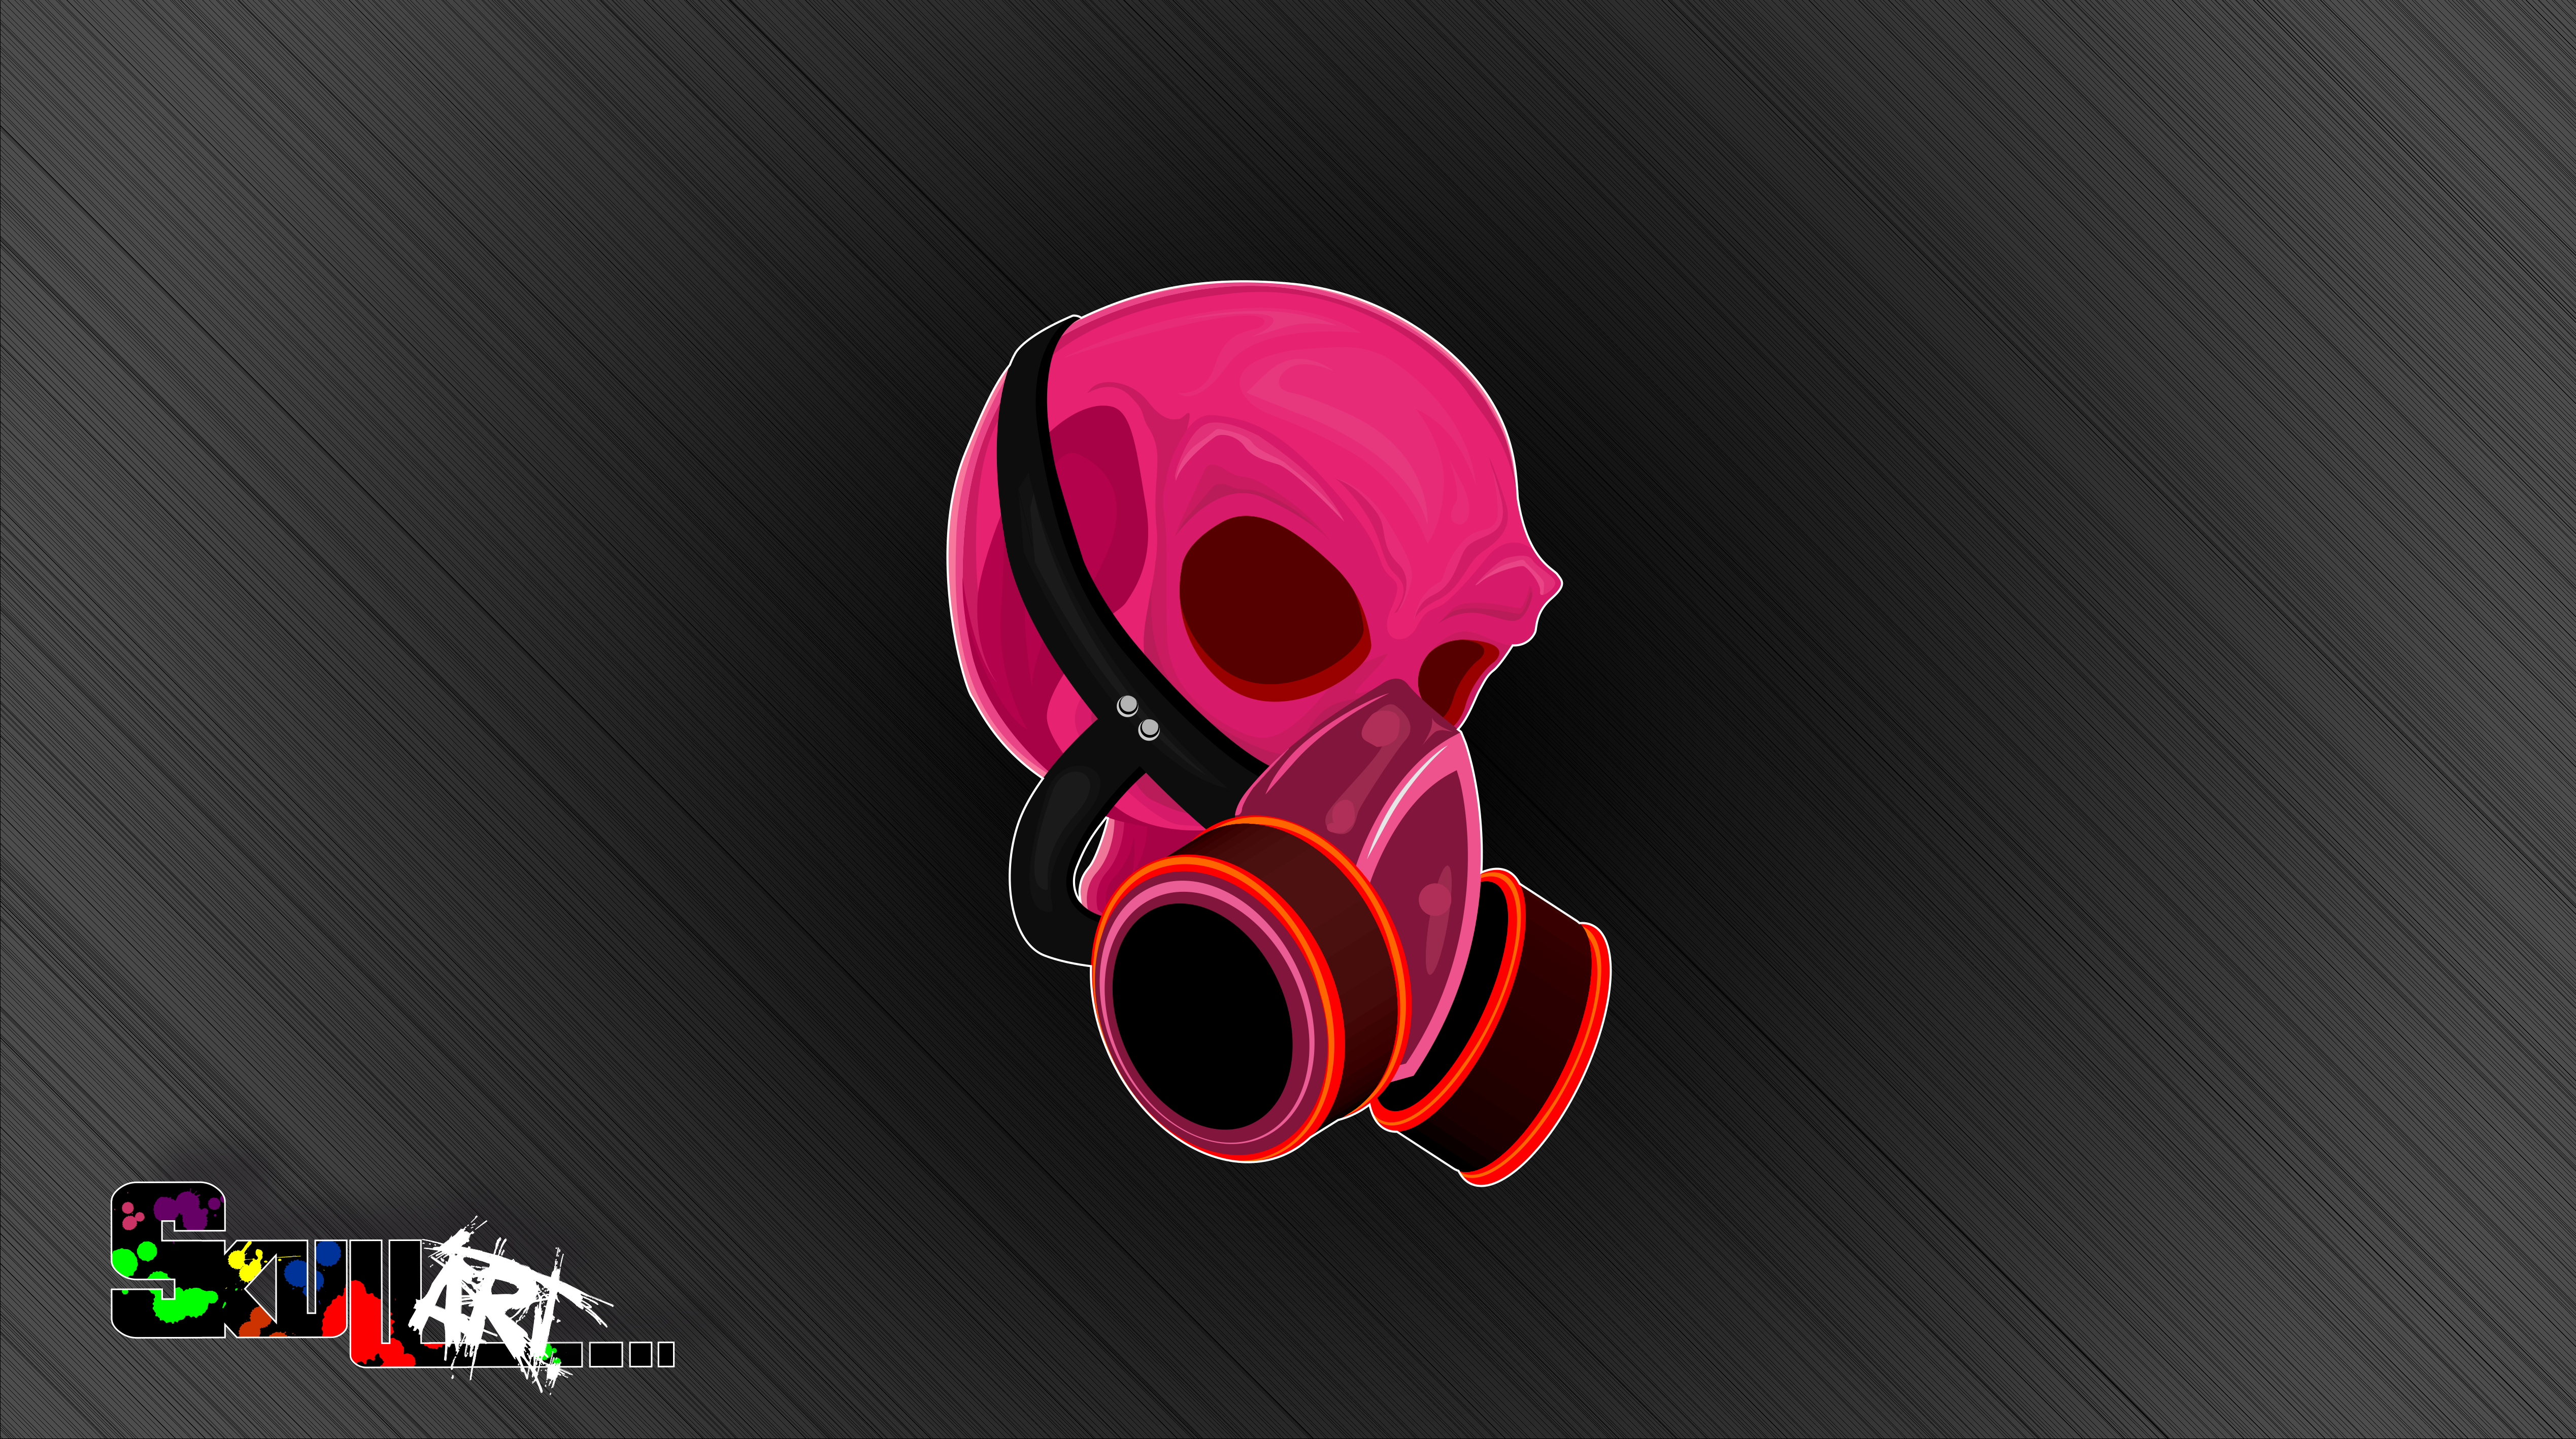 General 5075x2835 skull face mask colorful digital art simple background watermarked